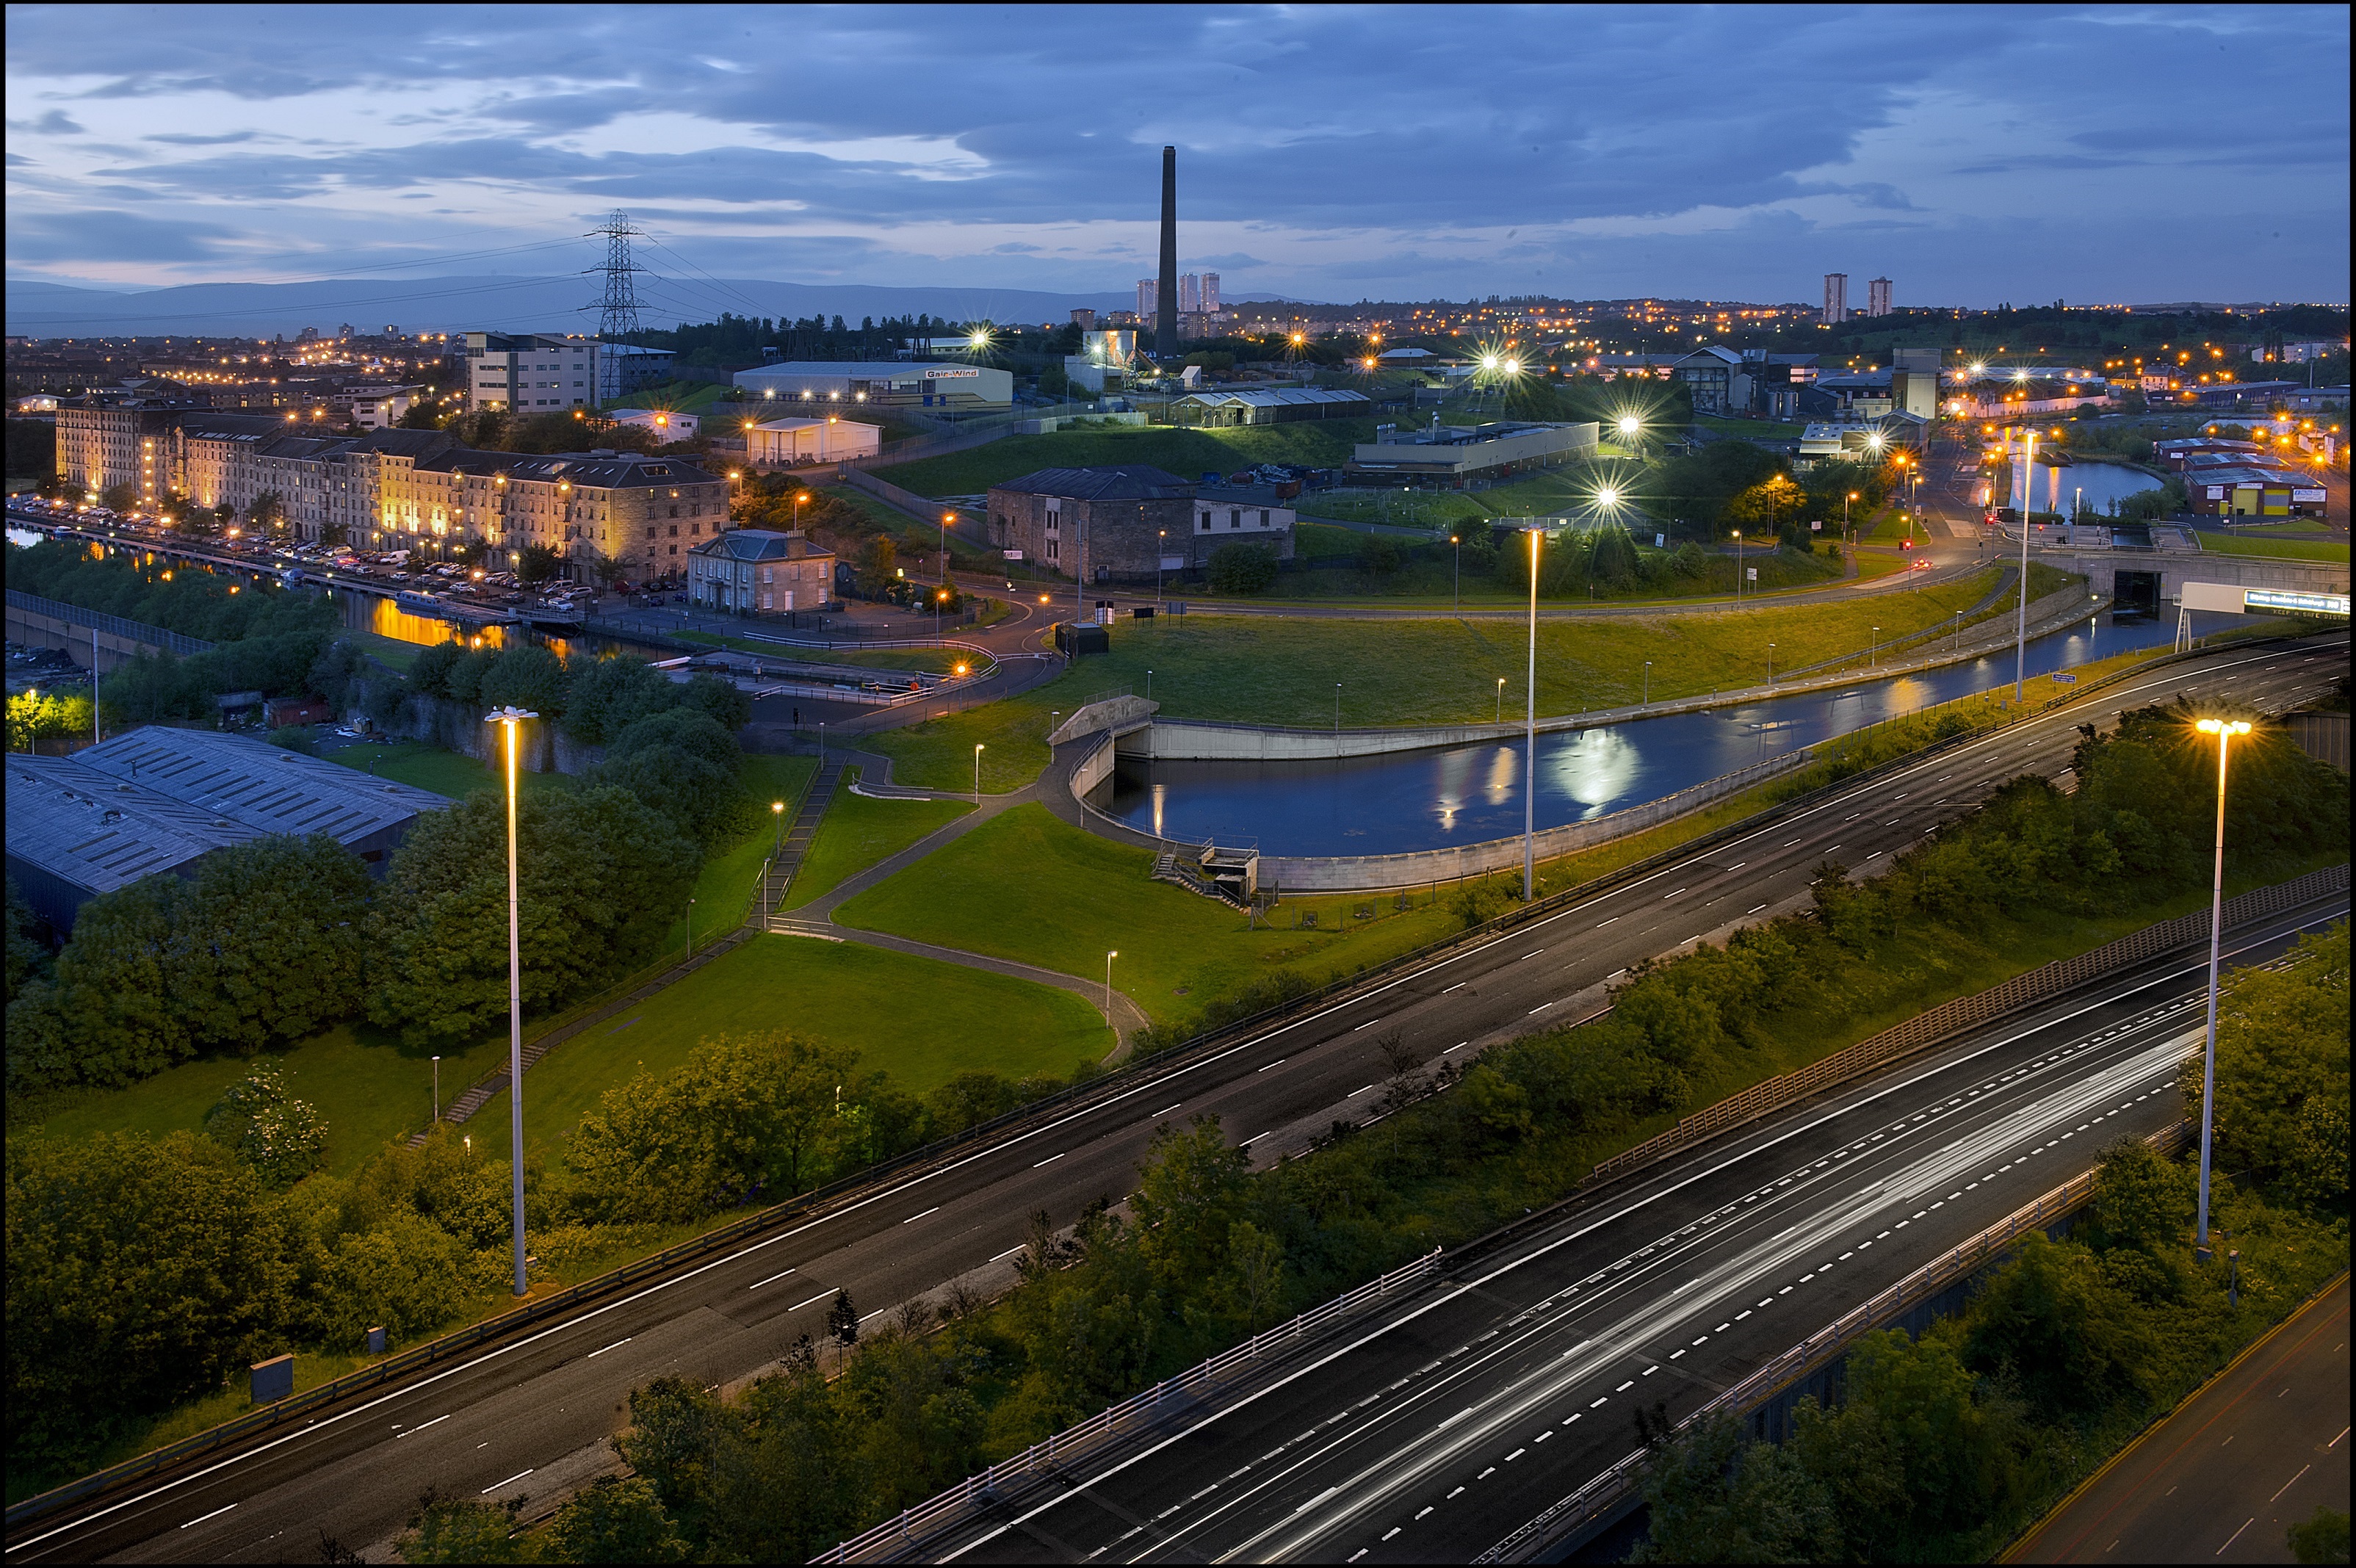 Scottish Canals launches new three-year vision